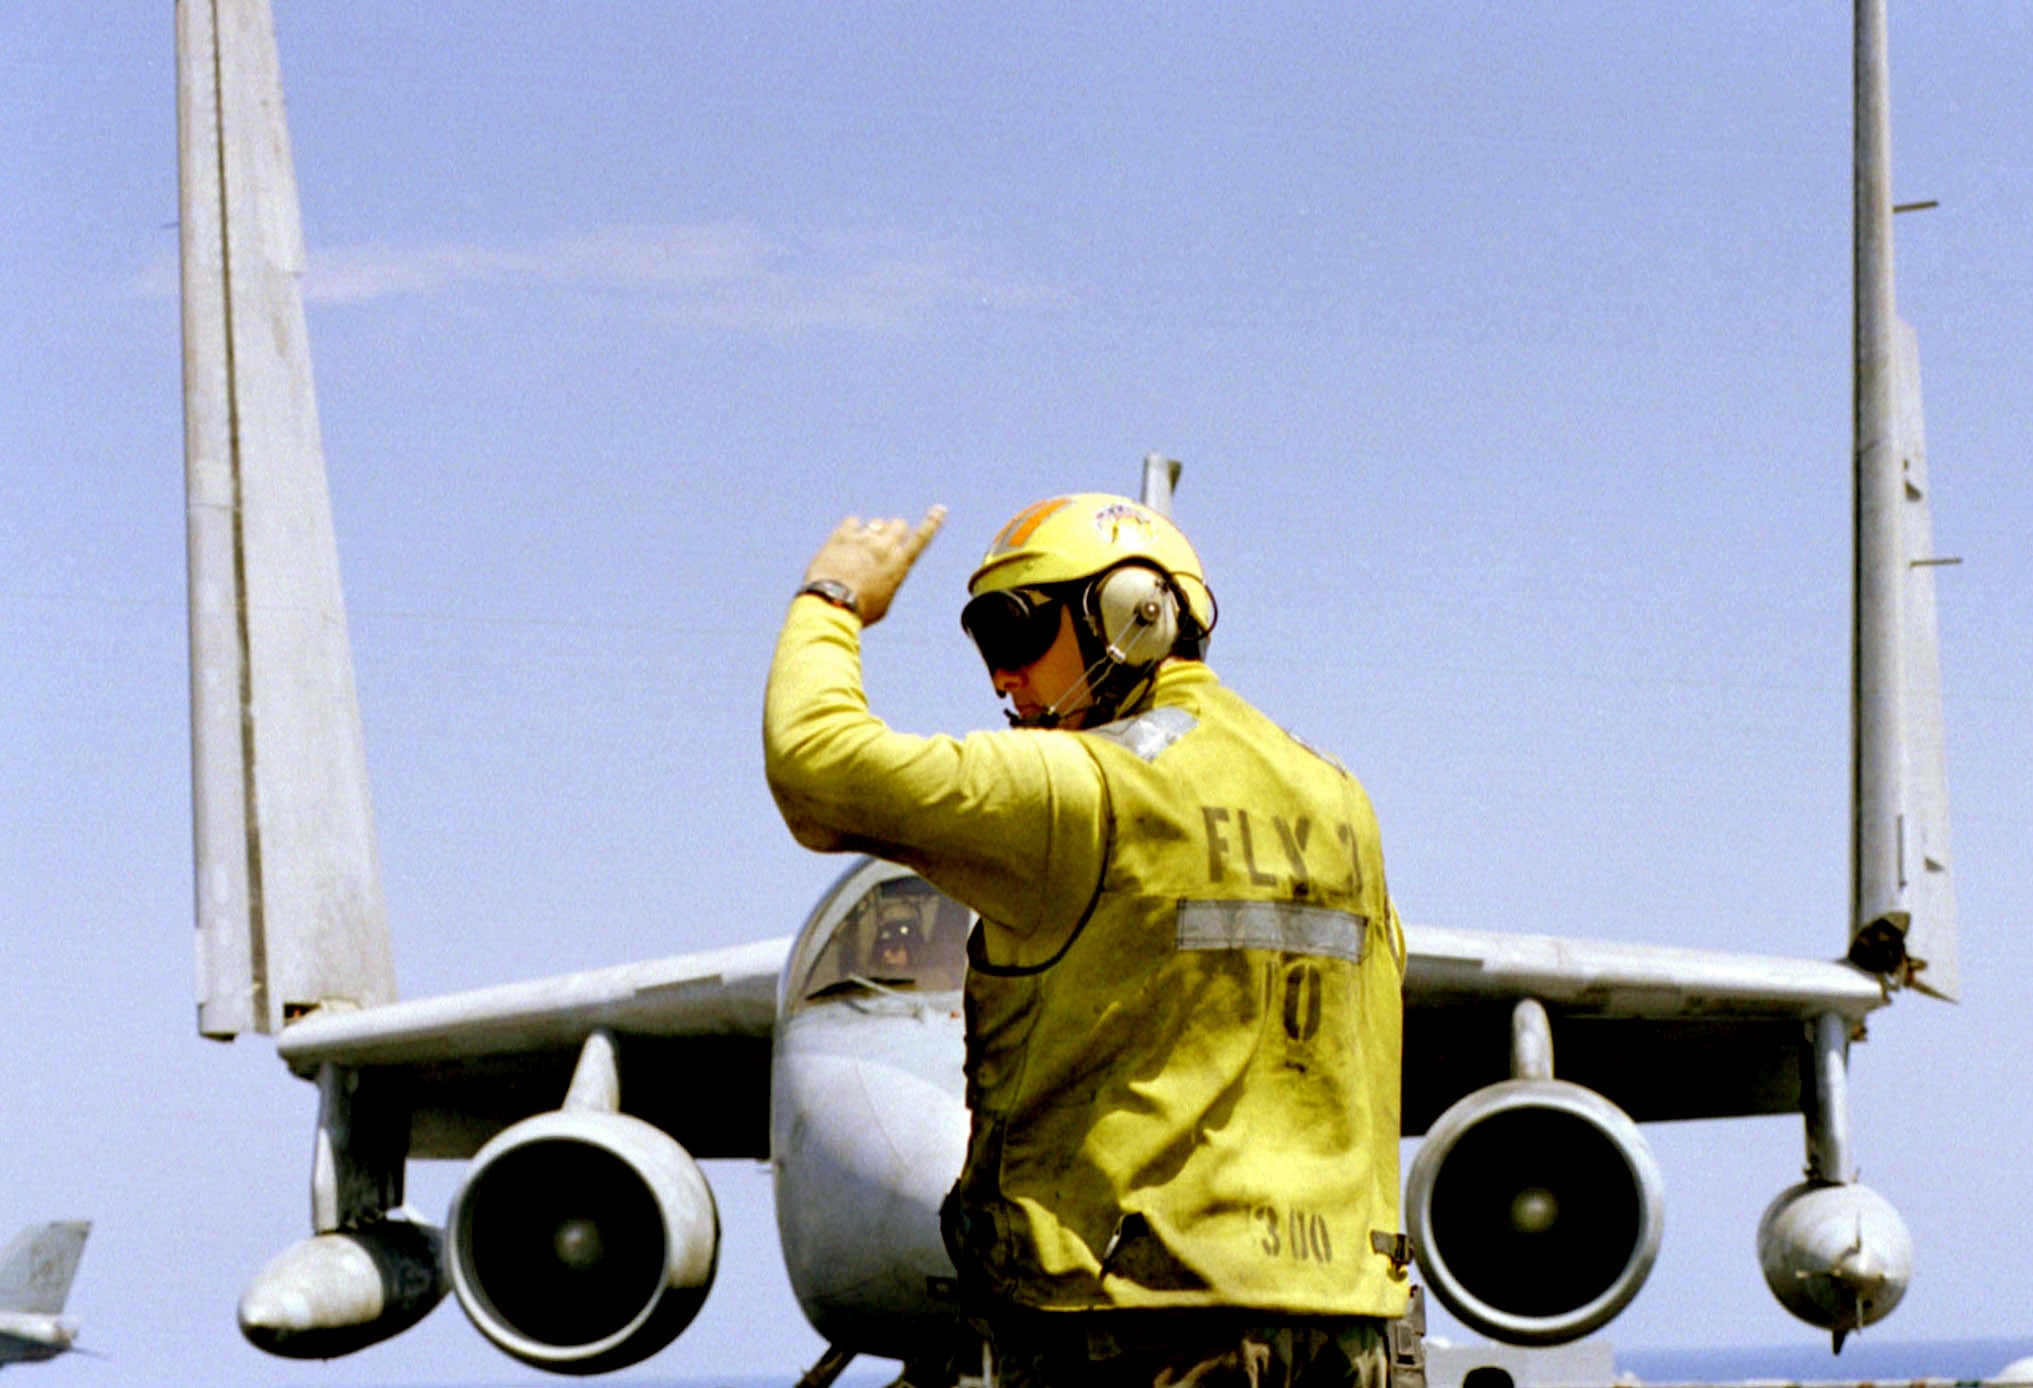 990505-N-7280M-006
	The Fly 3 Petty Officer directs an S-3B Viking as it folds its wings on the flight deck of the USS Theodore Roosevelt (CVN 71) on May 5, 1999, after completing a NATO Operation Allied Force mission.  Roosevelt and its embarked Carrier Air Wing 8 are operating in the Adriatic Sea in support of Operation Allied Force which is the air operation against targets in the Federal Republic of Yugoslavia.  The Viking is attached to Air Anti-Submarine Squadron 24, Naval Air Station Cecil Field, Fla.  DoD photo by Petty Officer 3rd Class Donne' McKissic, U.S. Navy.  (Released)